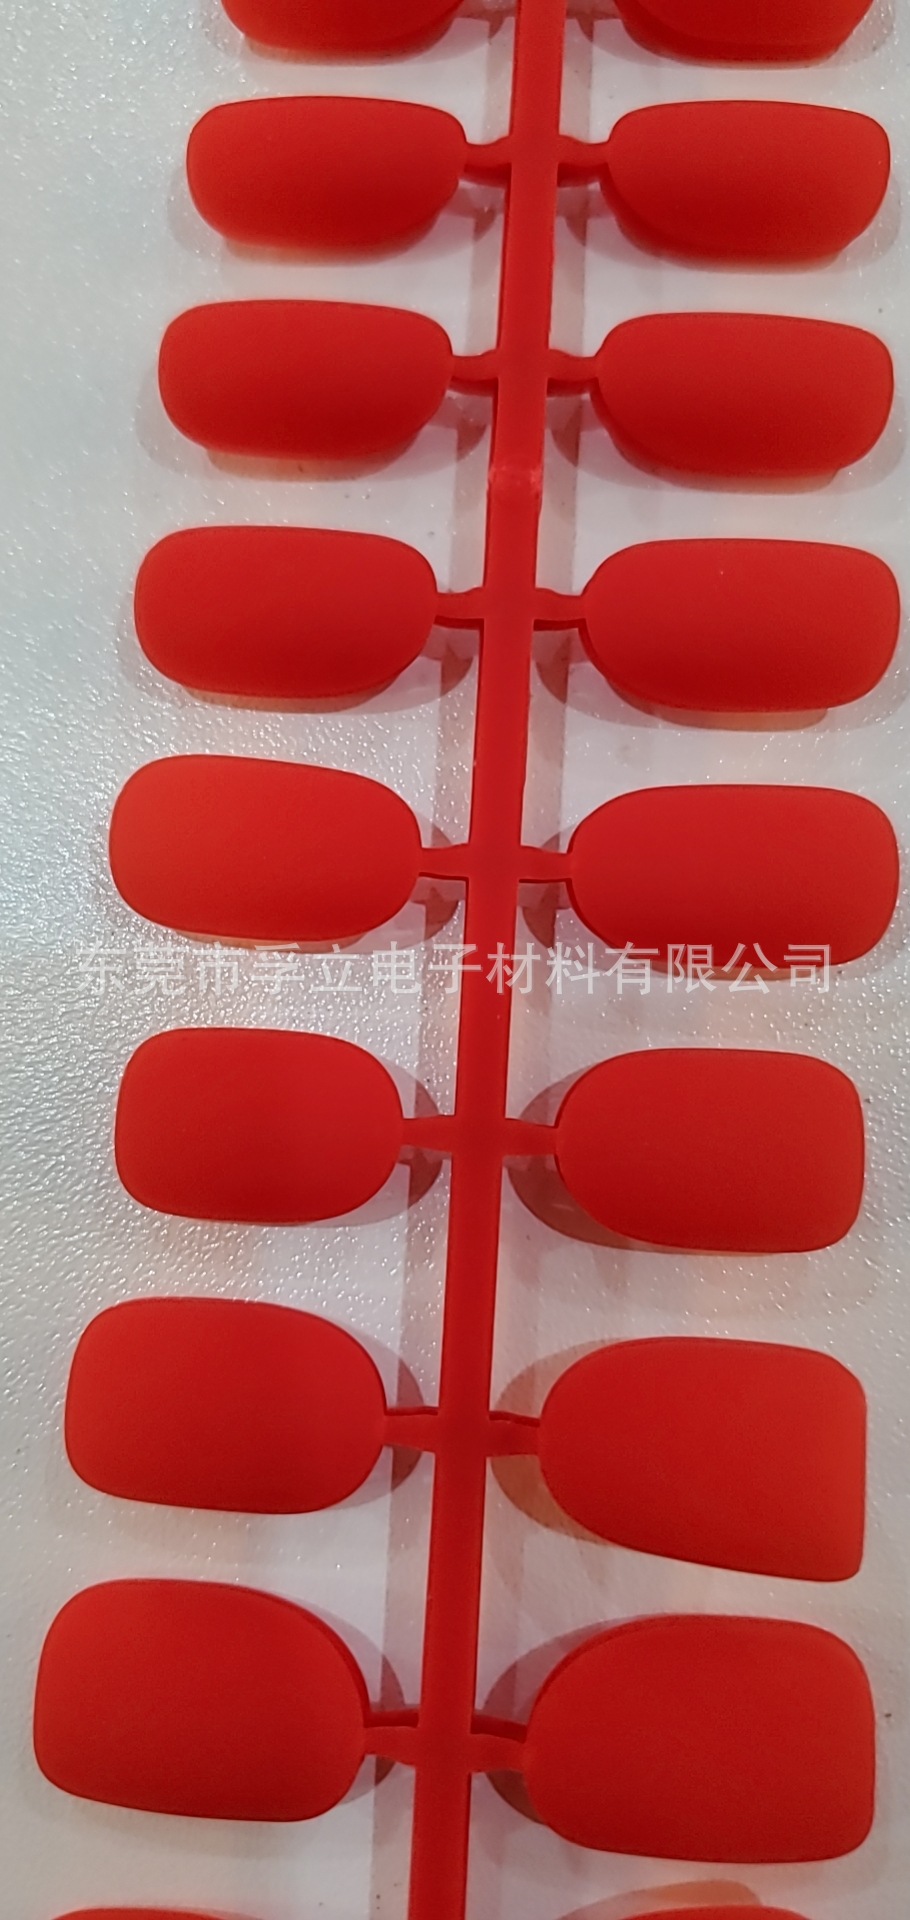 Nail enhancement,Nail stickers,Fake nails, LED high strength,waterproof Persistence Low odor,Peelable